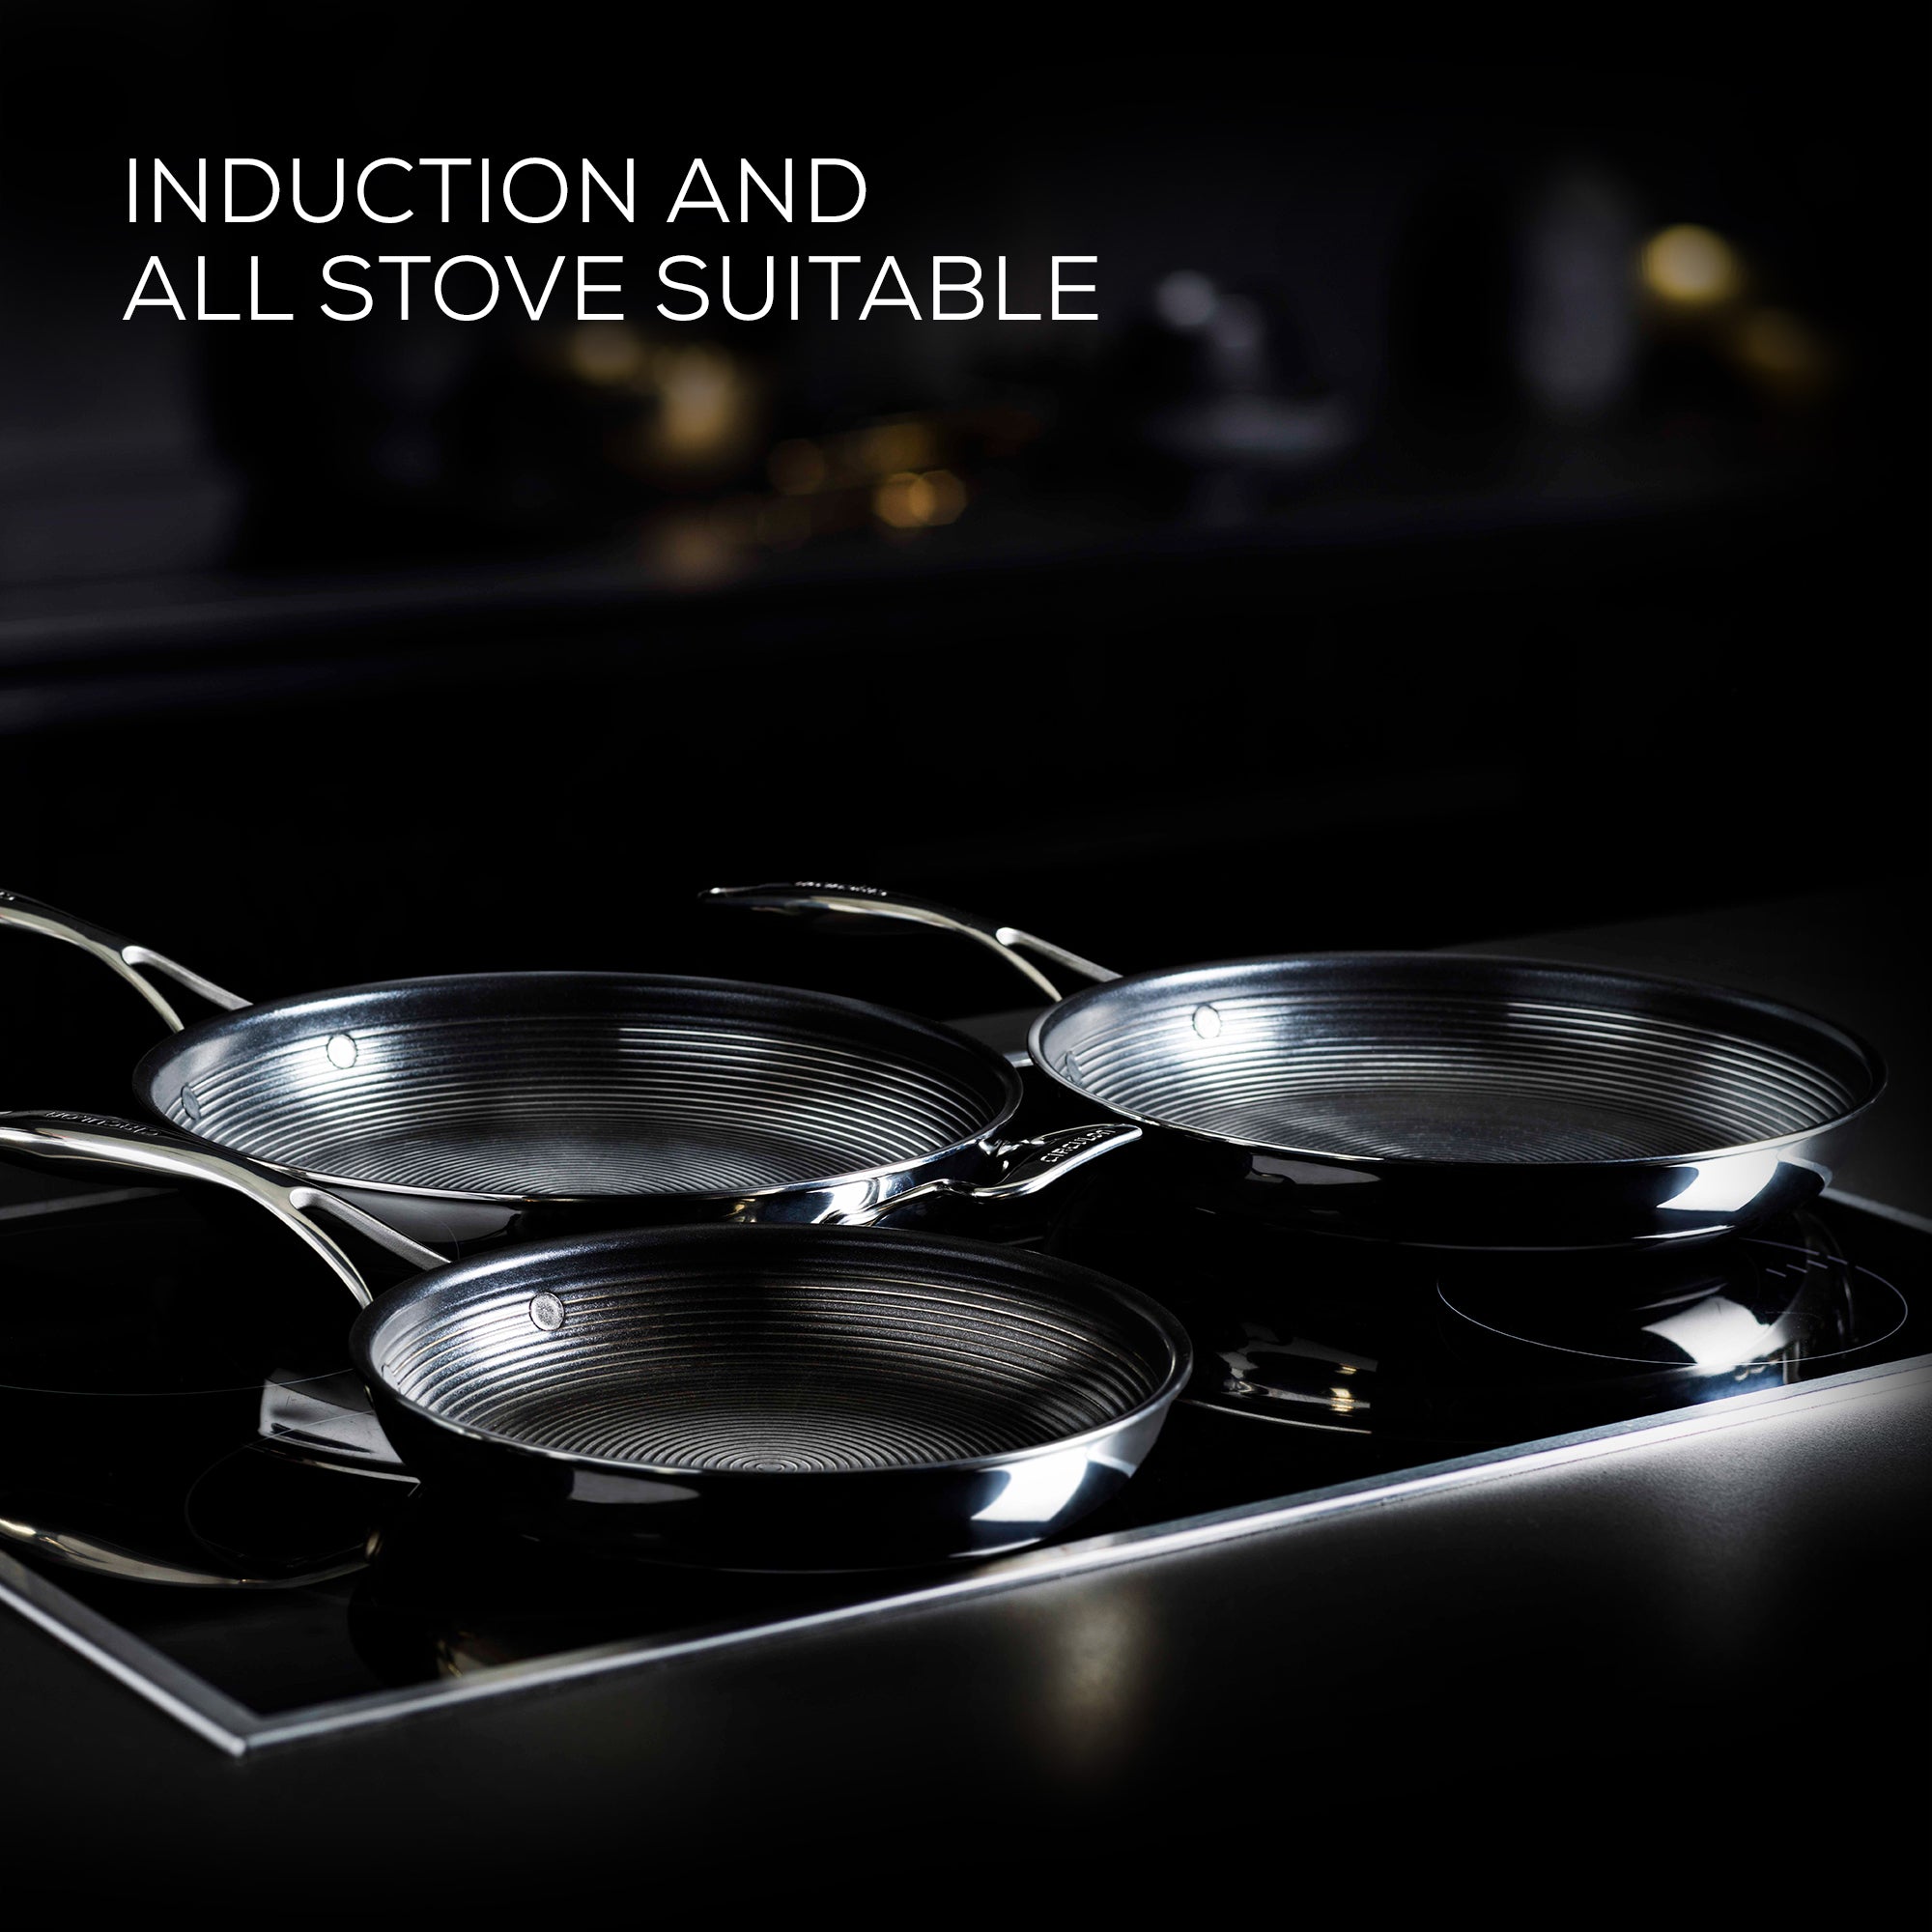 Circulon Steelshield is suitable for all stovetops including induction.